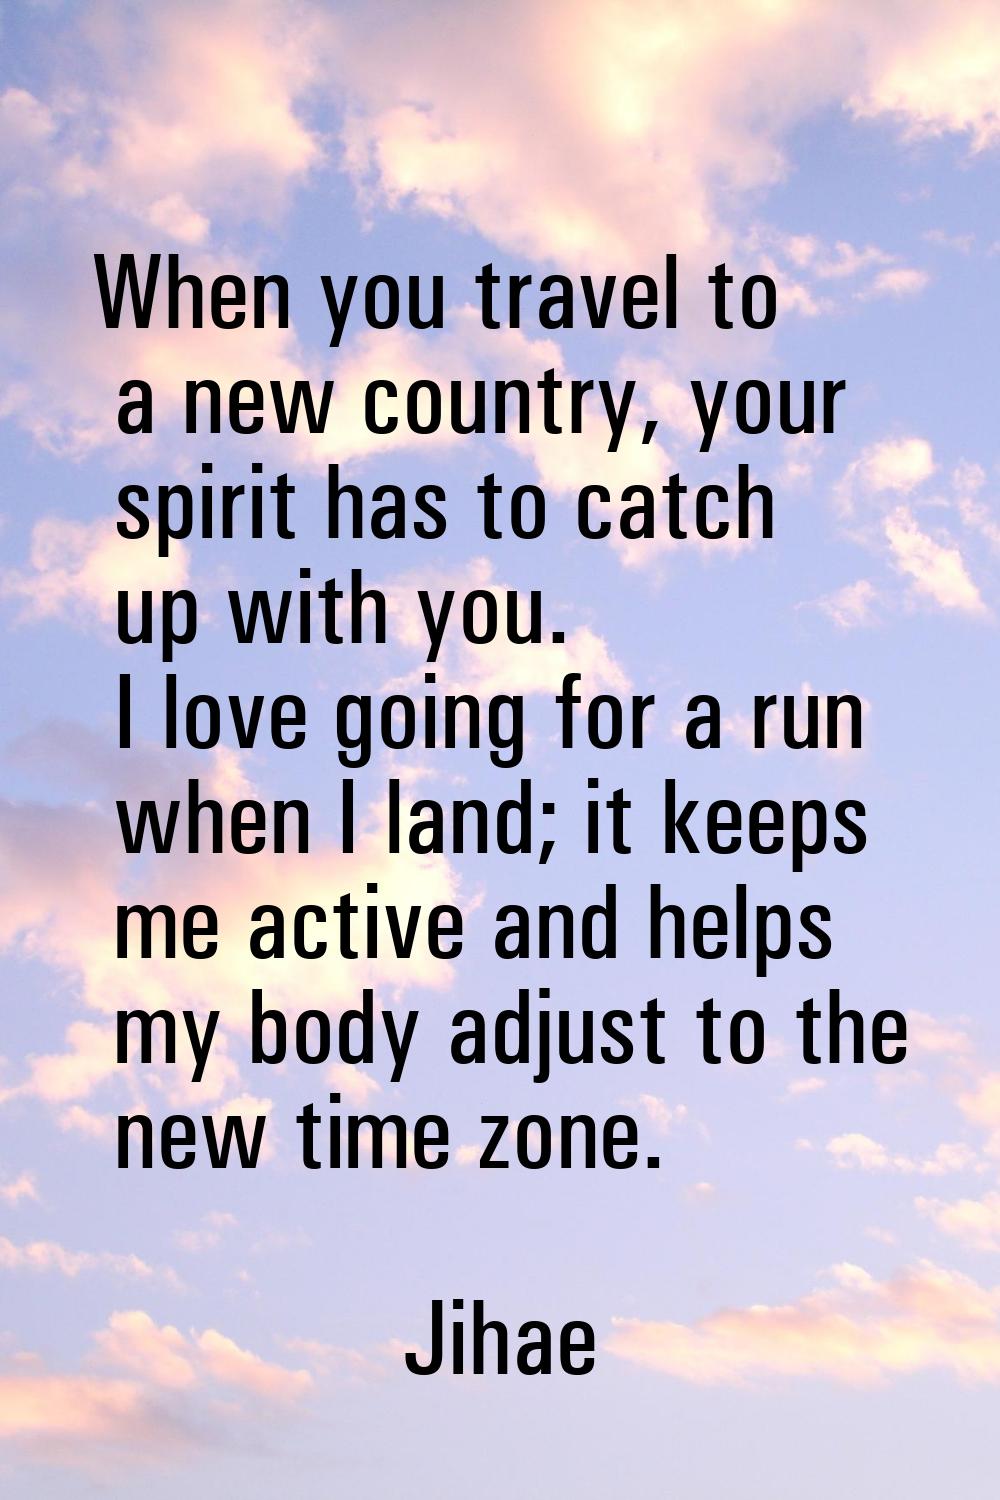 When you travel to a new country, your spirit has to catch up with you. I love going for a run when